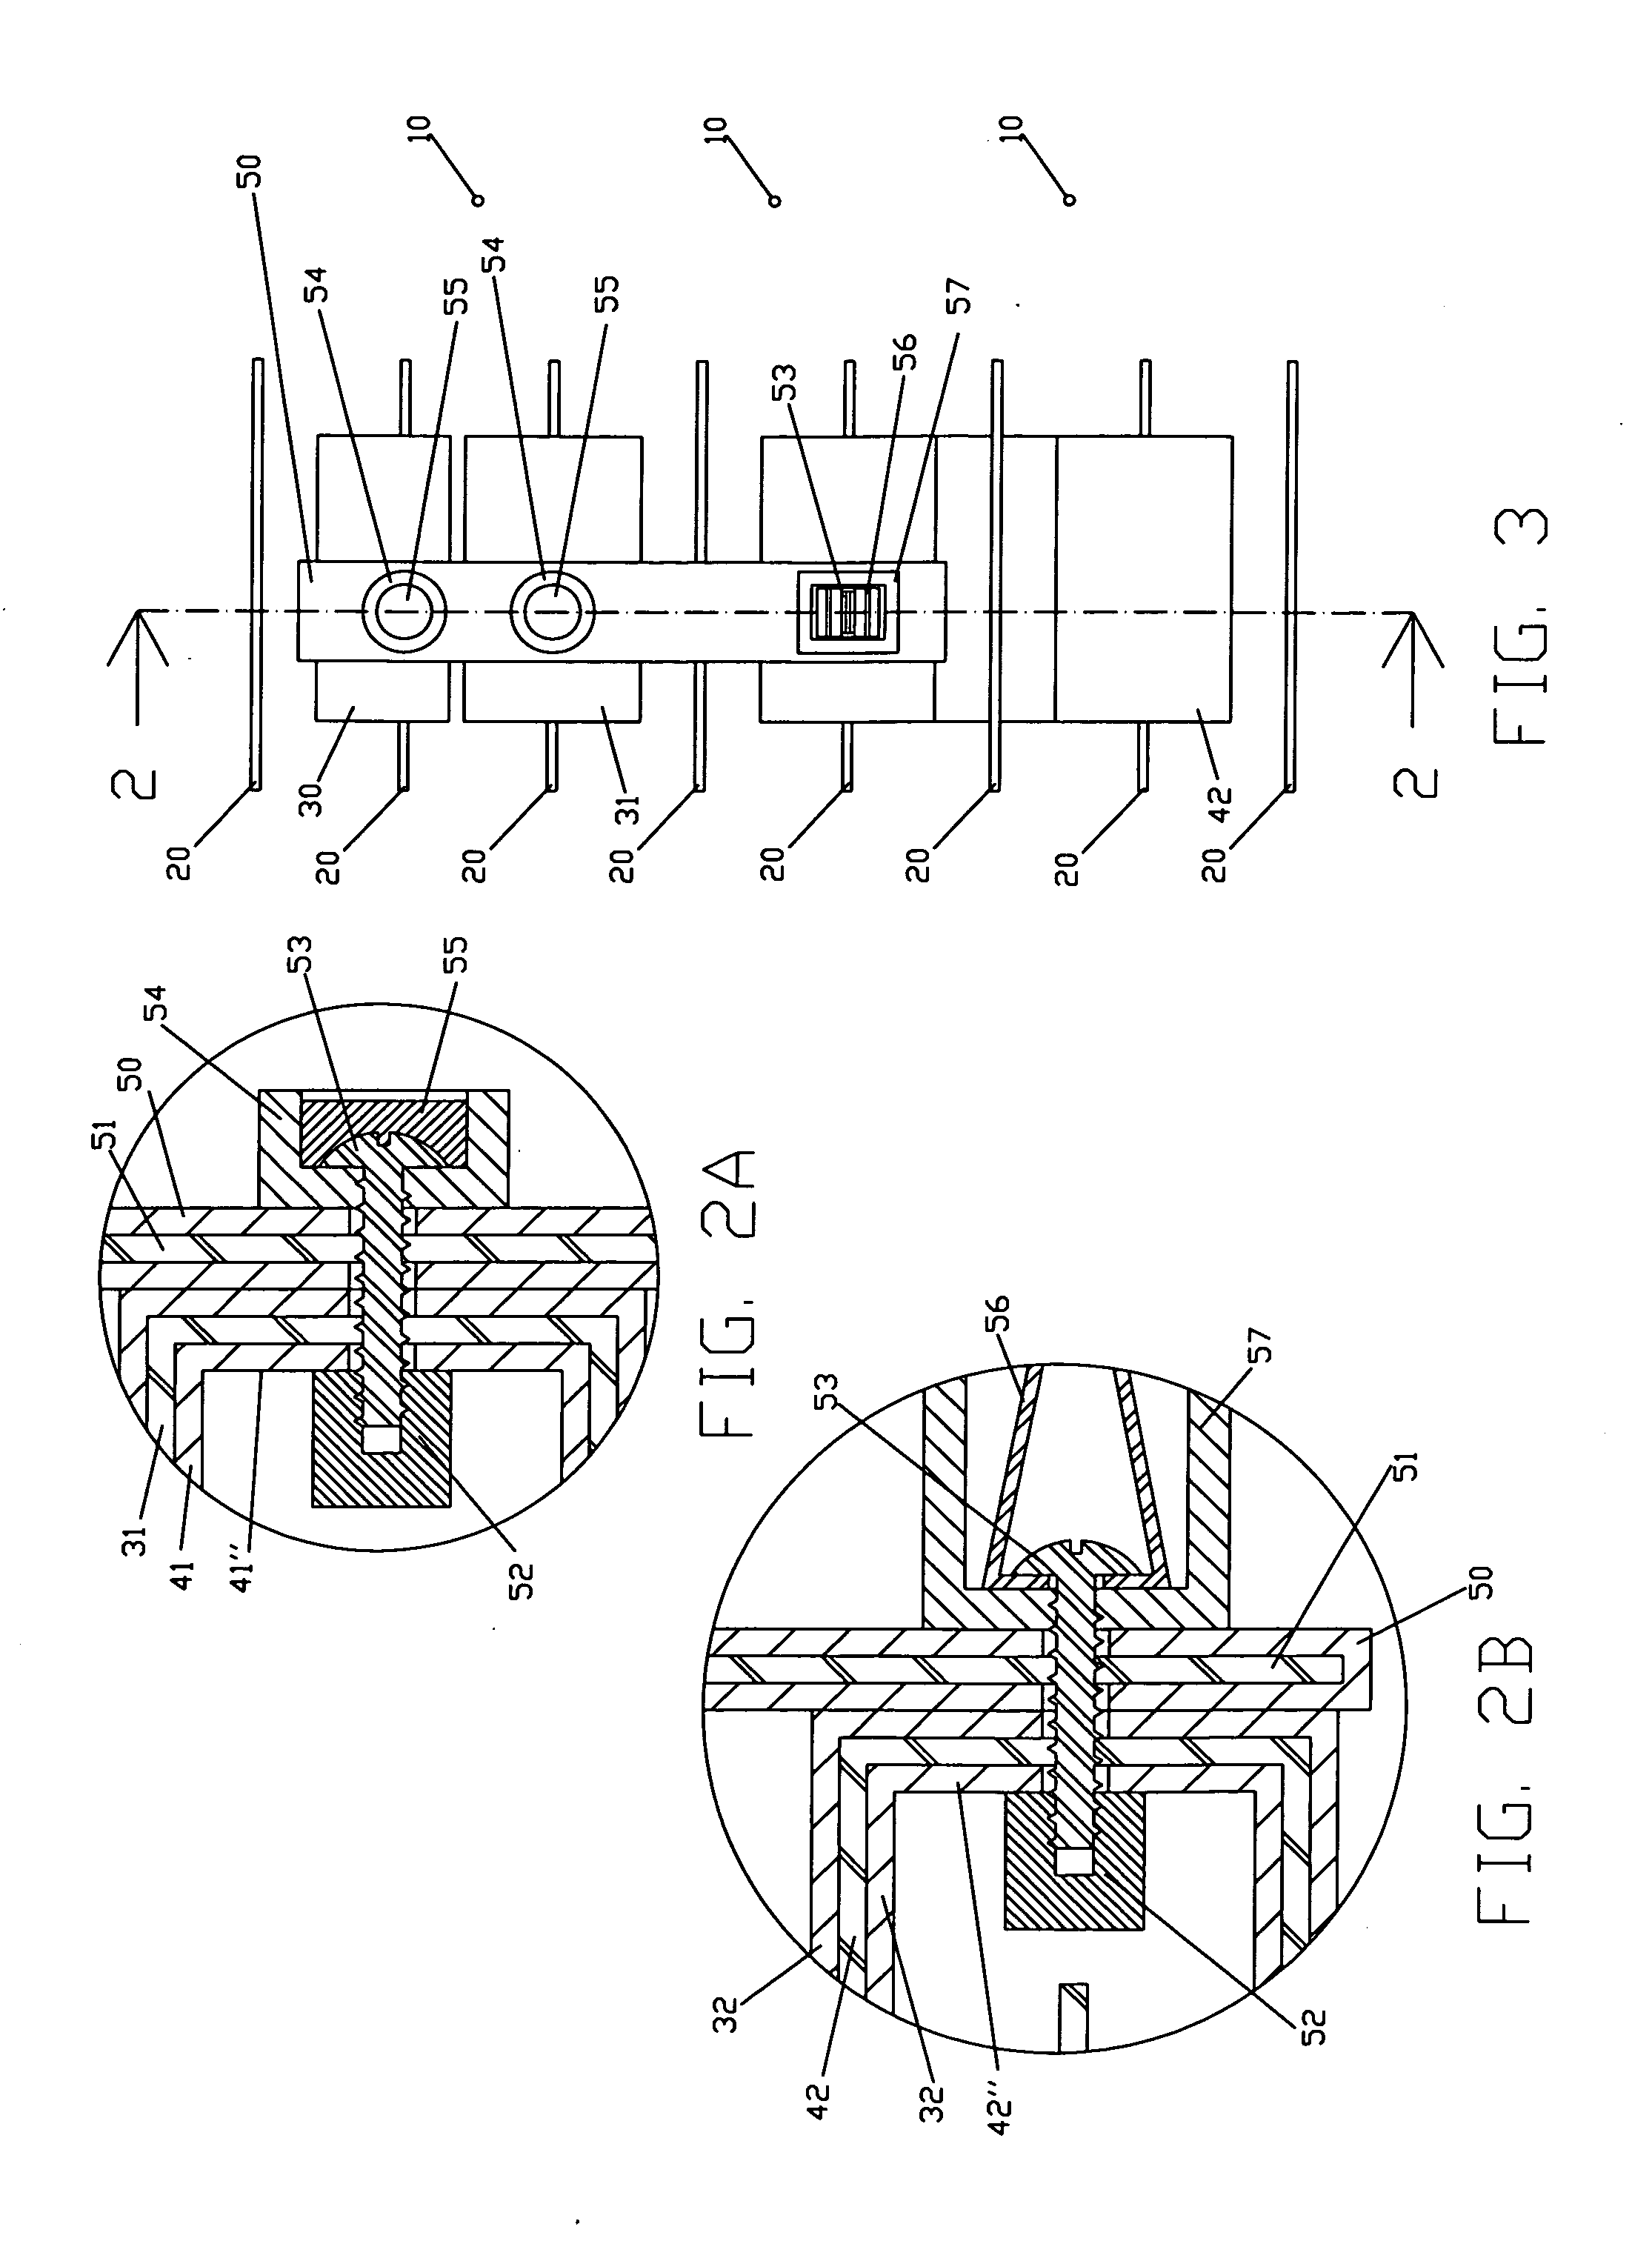 Collector modules for devices for removing particles from a gas